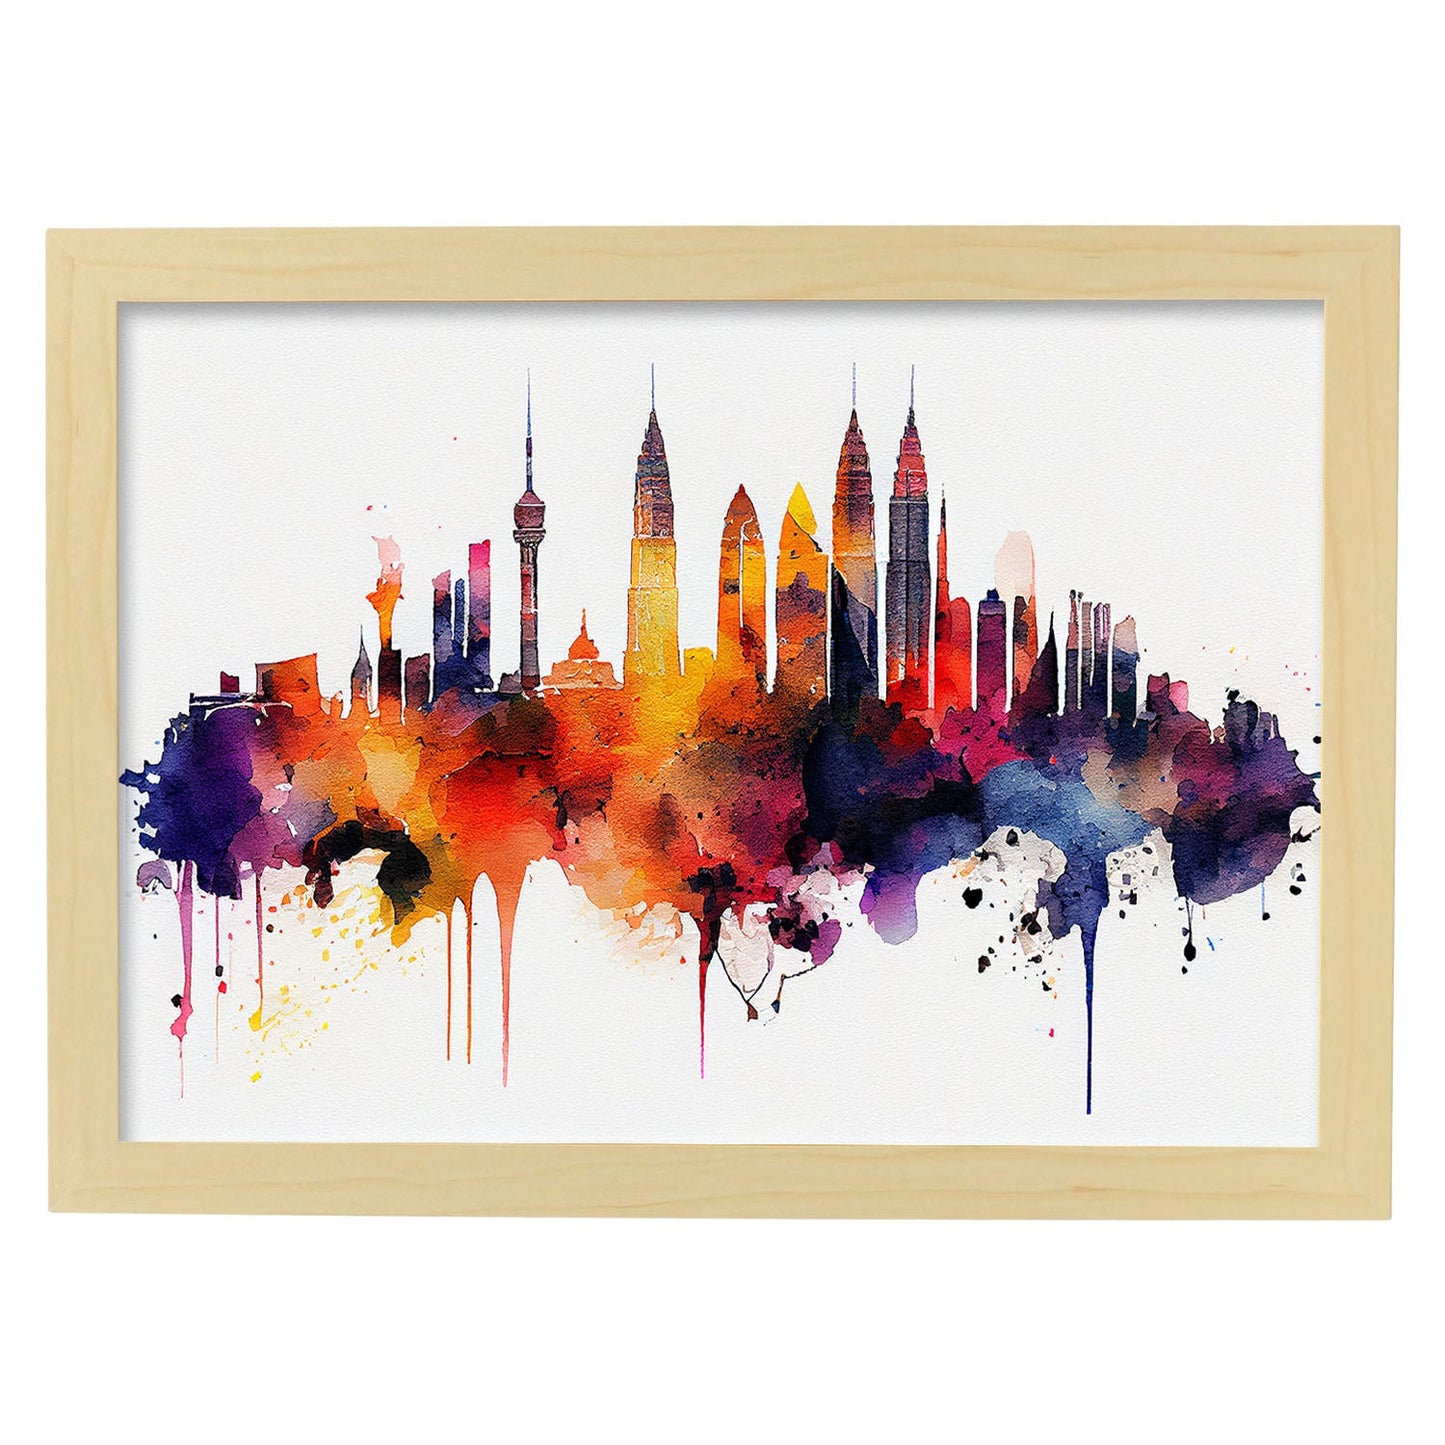 Nacnic watercolor of a skyline of the city of Kuala Lumpur_2. Aesthetic Wall Art Prints for Bedroom or Living Room Design.-Artwork-Nacnic-A4-Marco Madera Clara-Nacnic Estudio SL